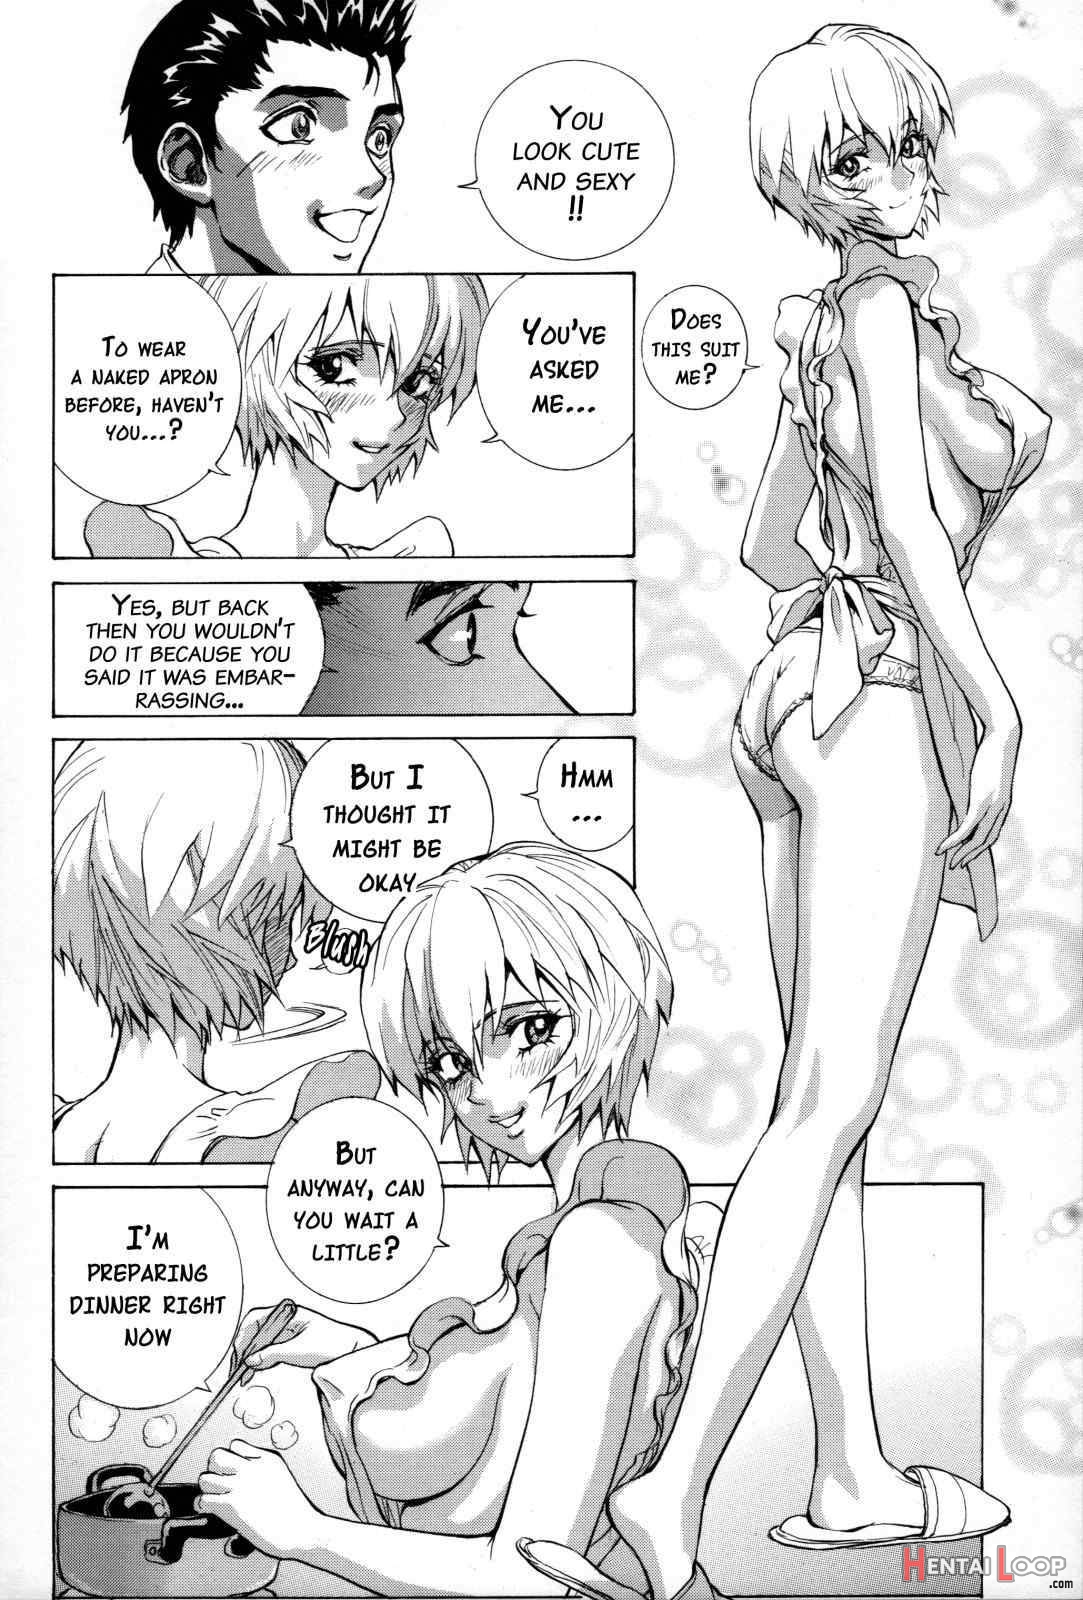 Ayanami β page 4